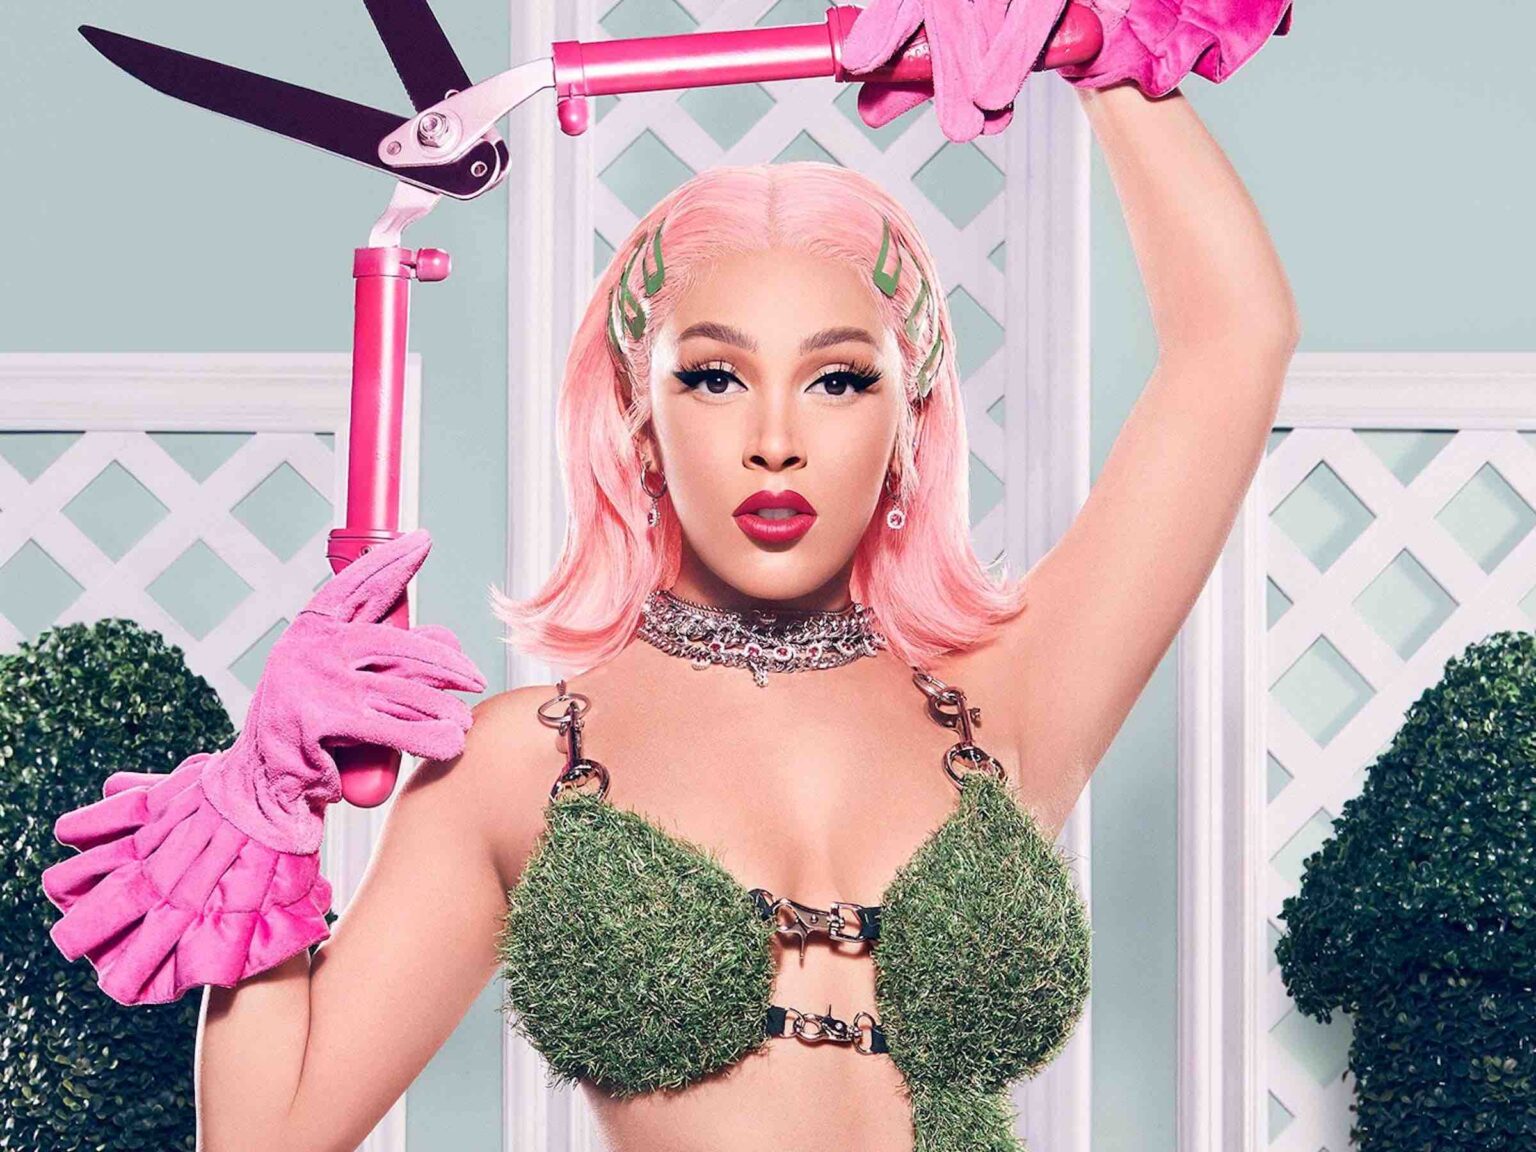 Has Doja Cat become the new Queen of TikTok? See the reasons why she is making herself known with her songs.